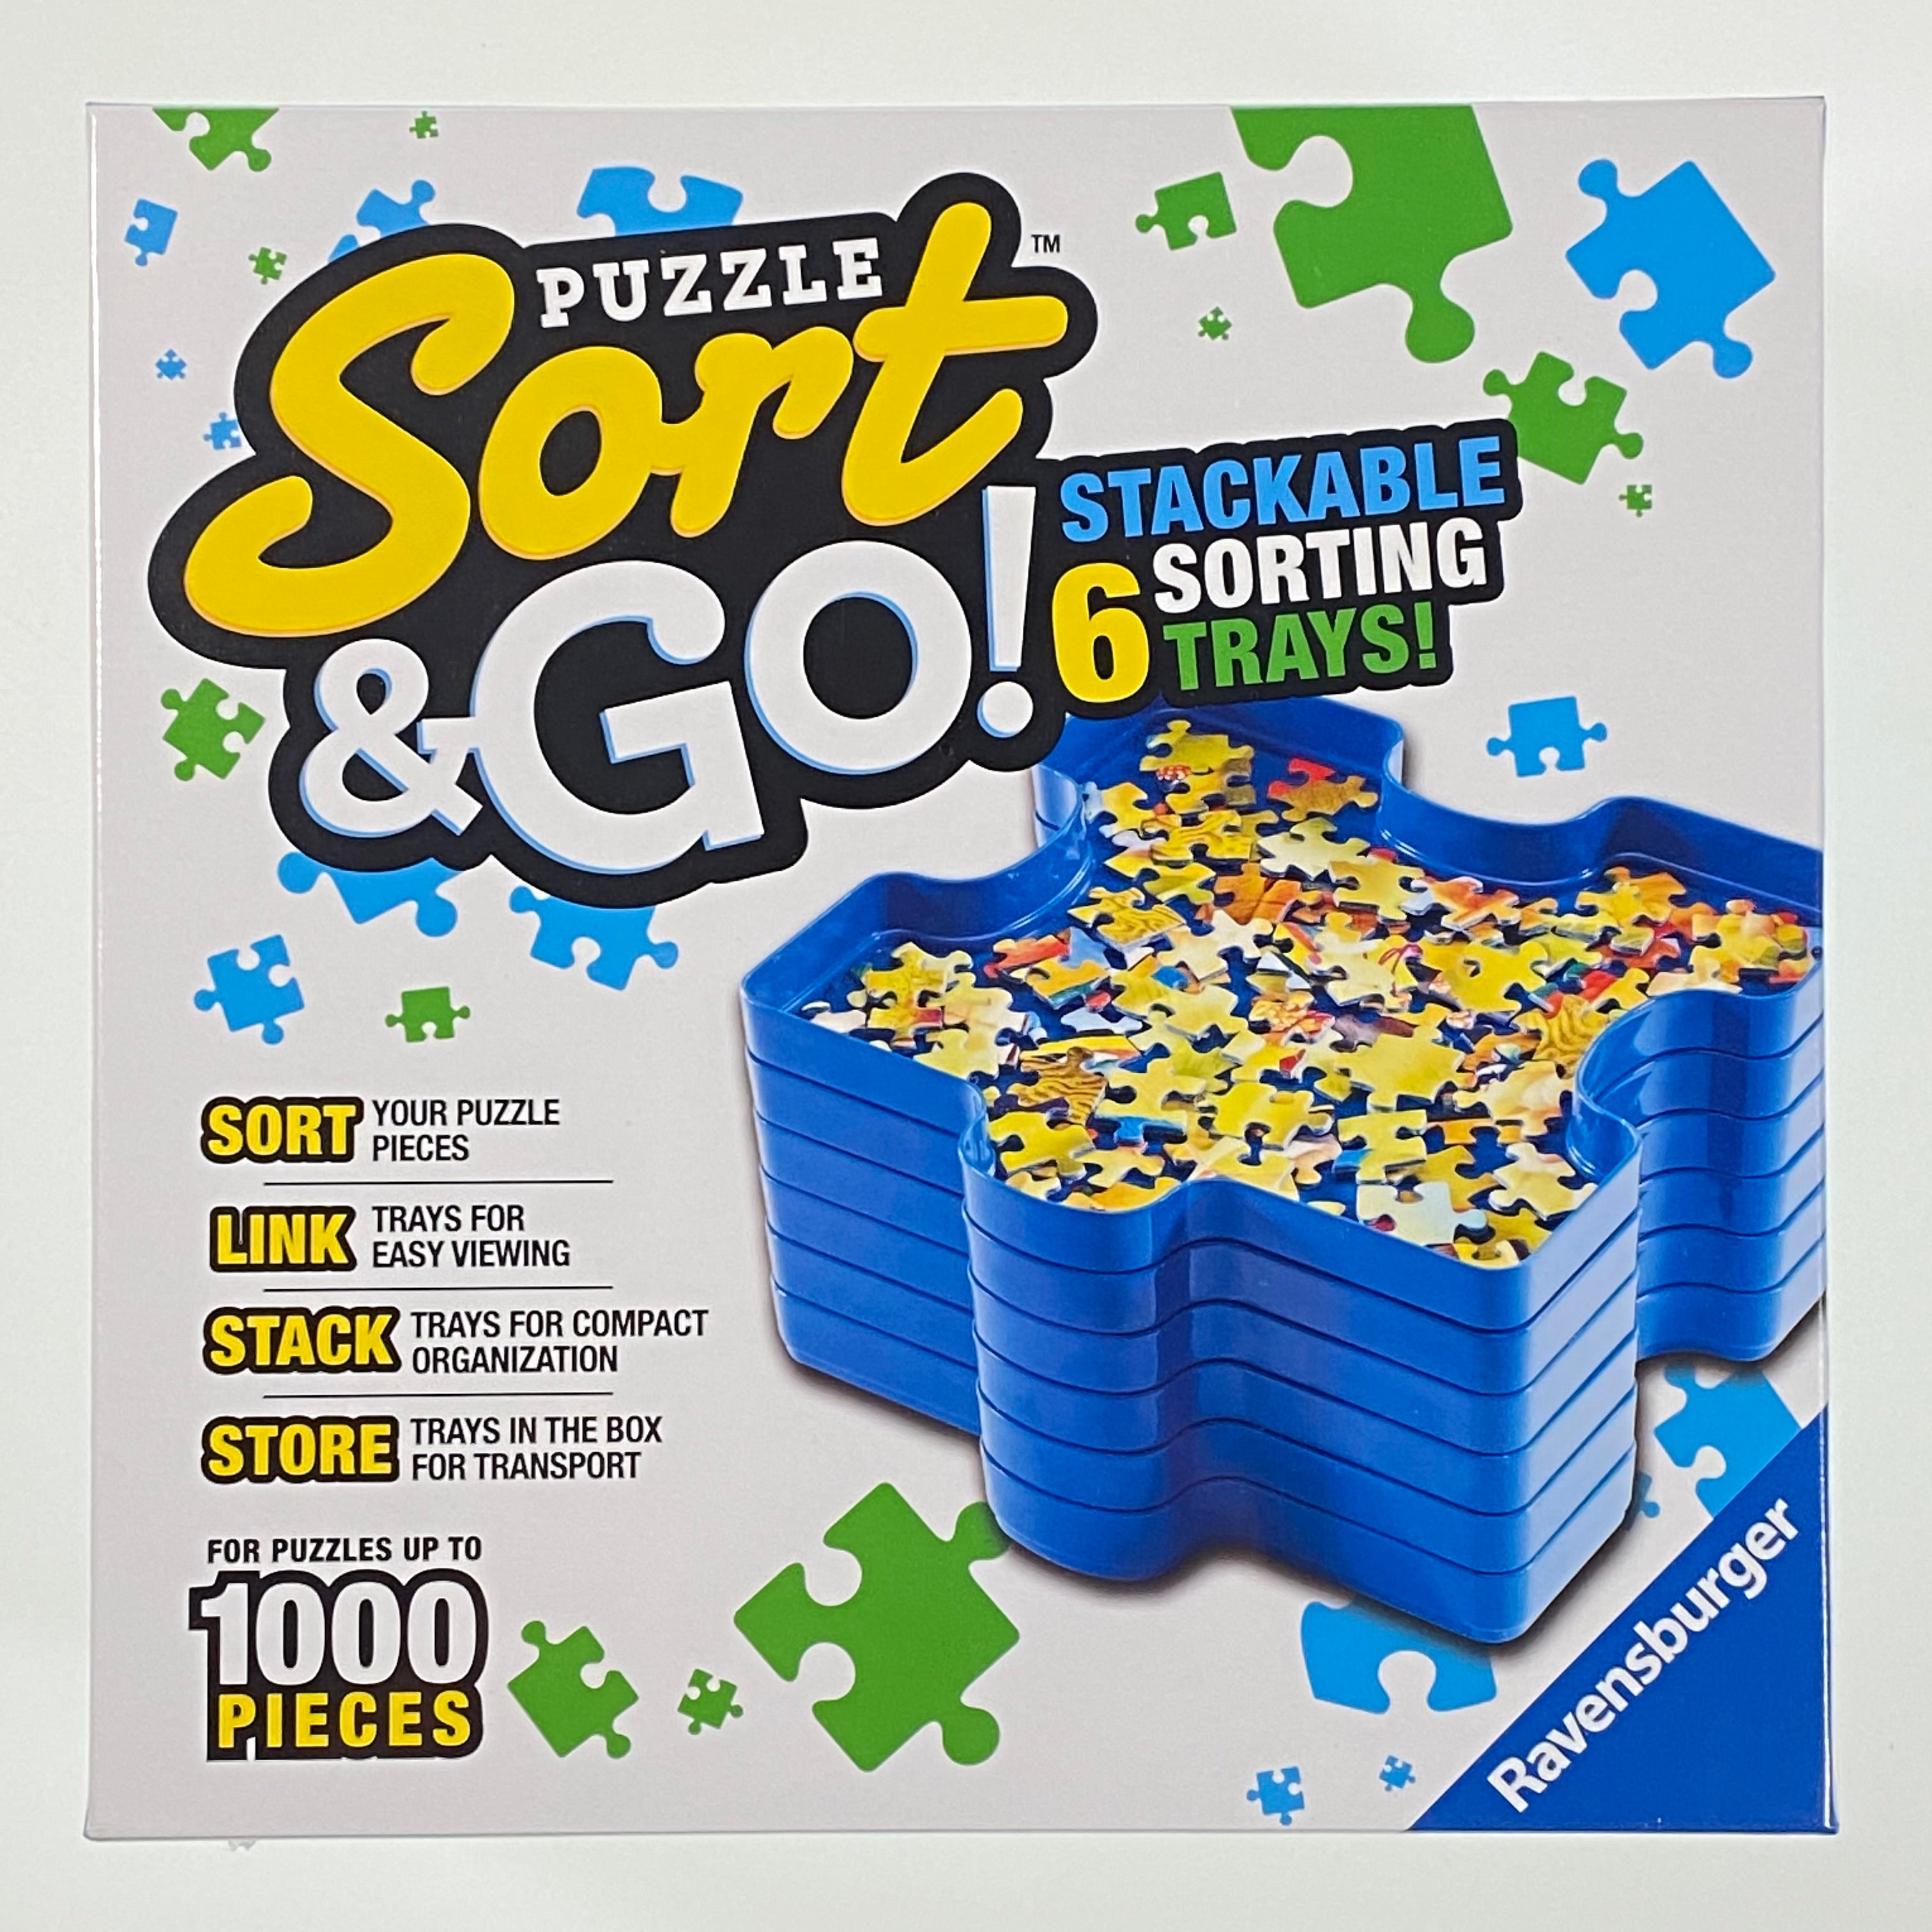 Ravensburger Sort & Go Jigsaw Puzzle 6 Stackable Sorting Trays